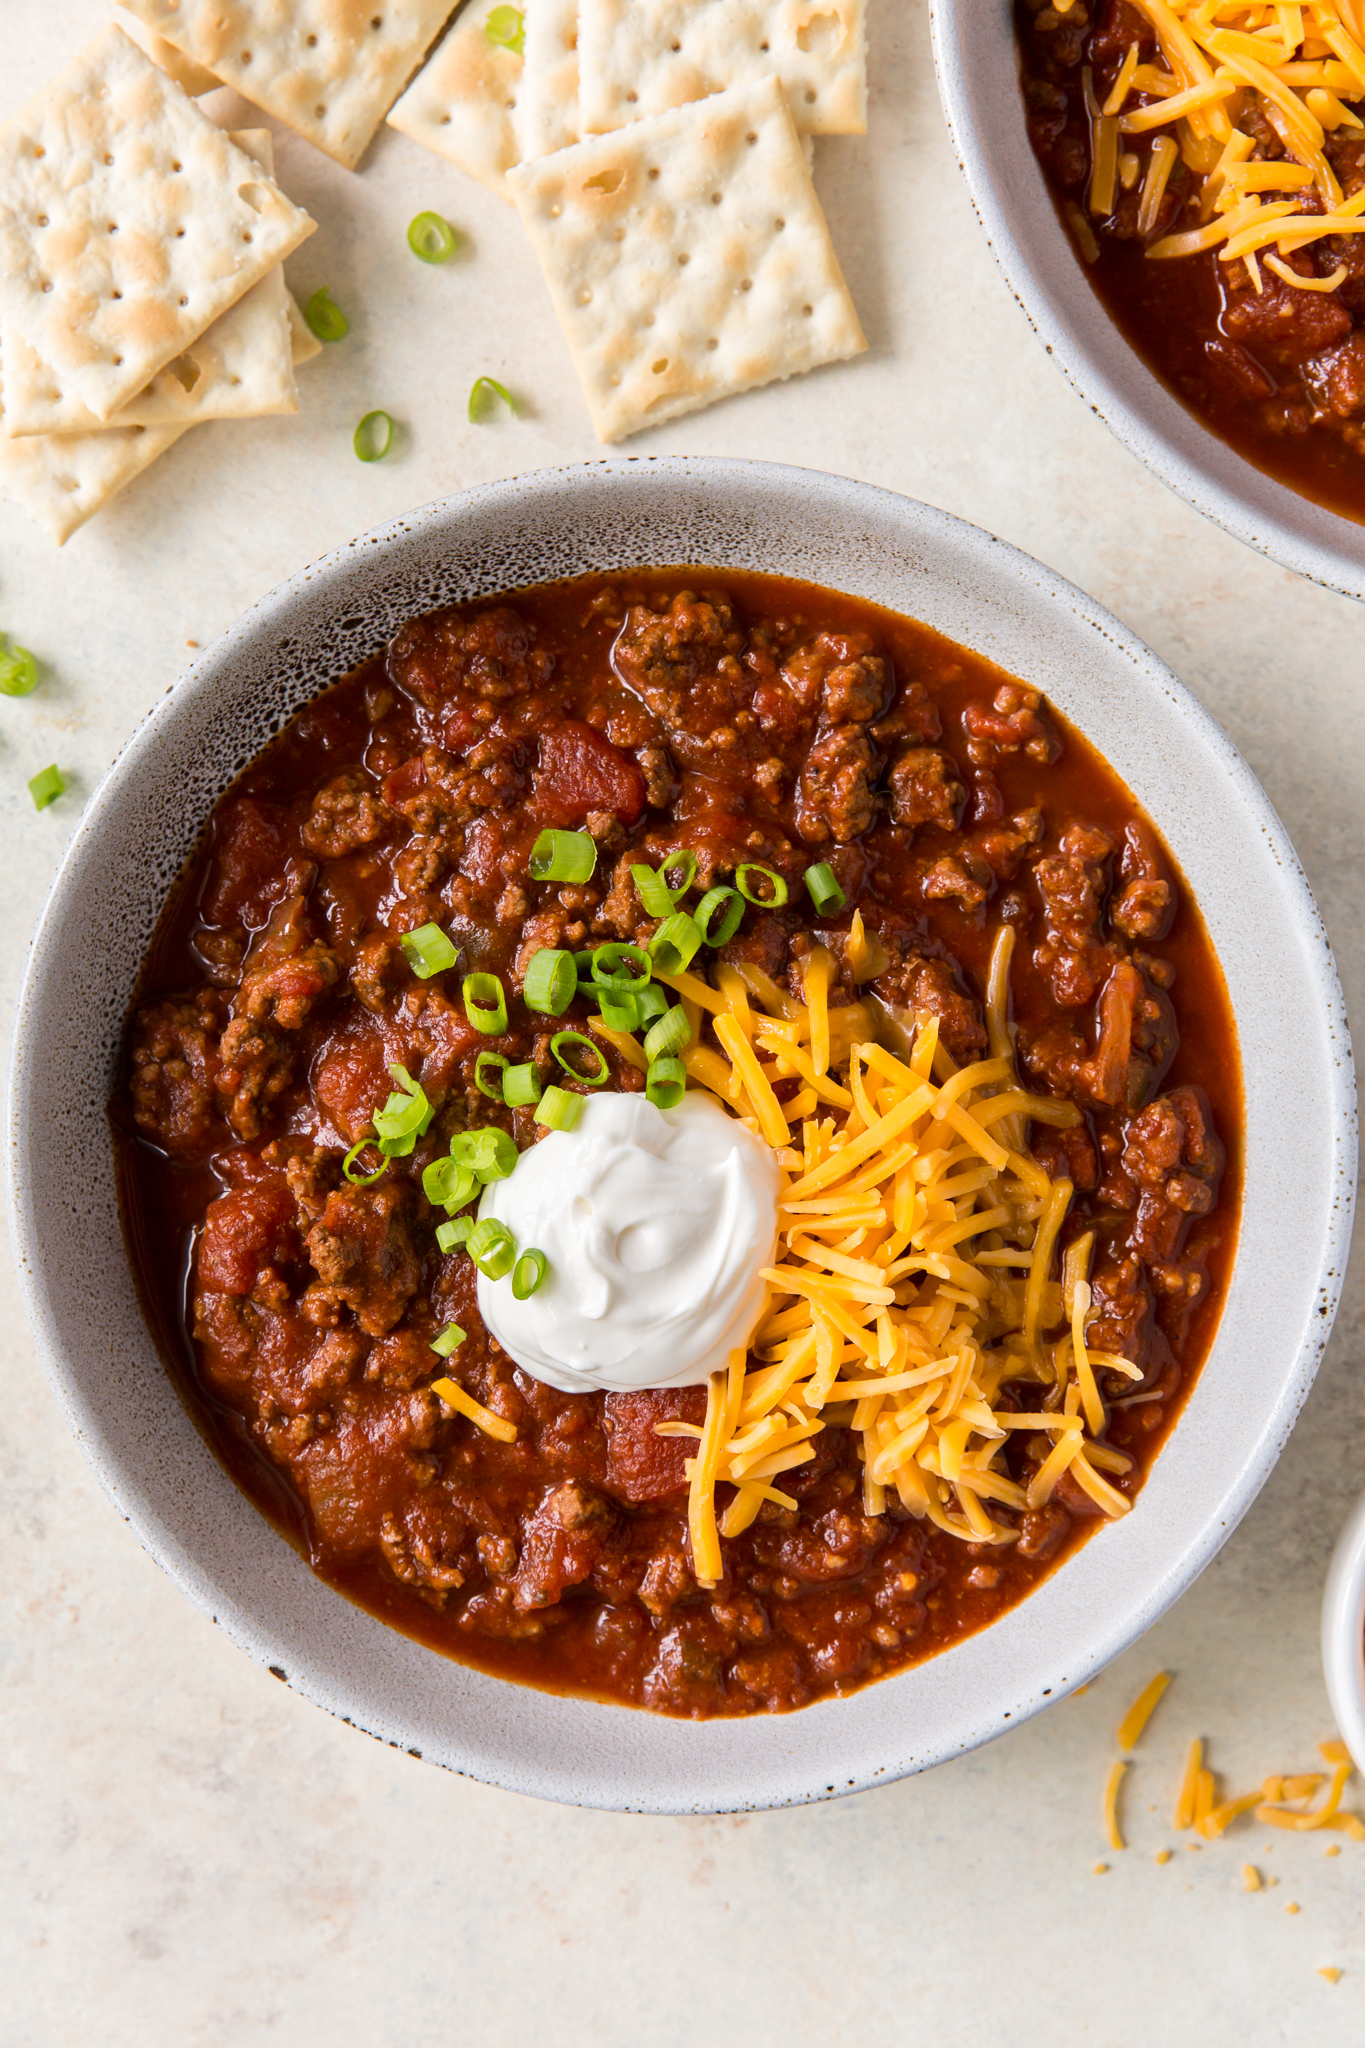 A large bowl of bean-free chili topped with chives, cheddar cheese, sour cream and crackers.